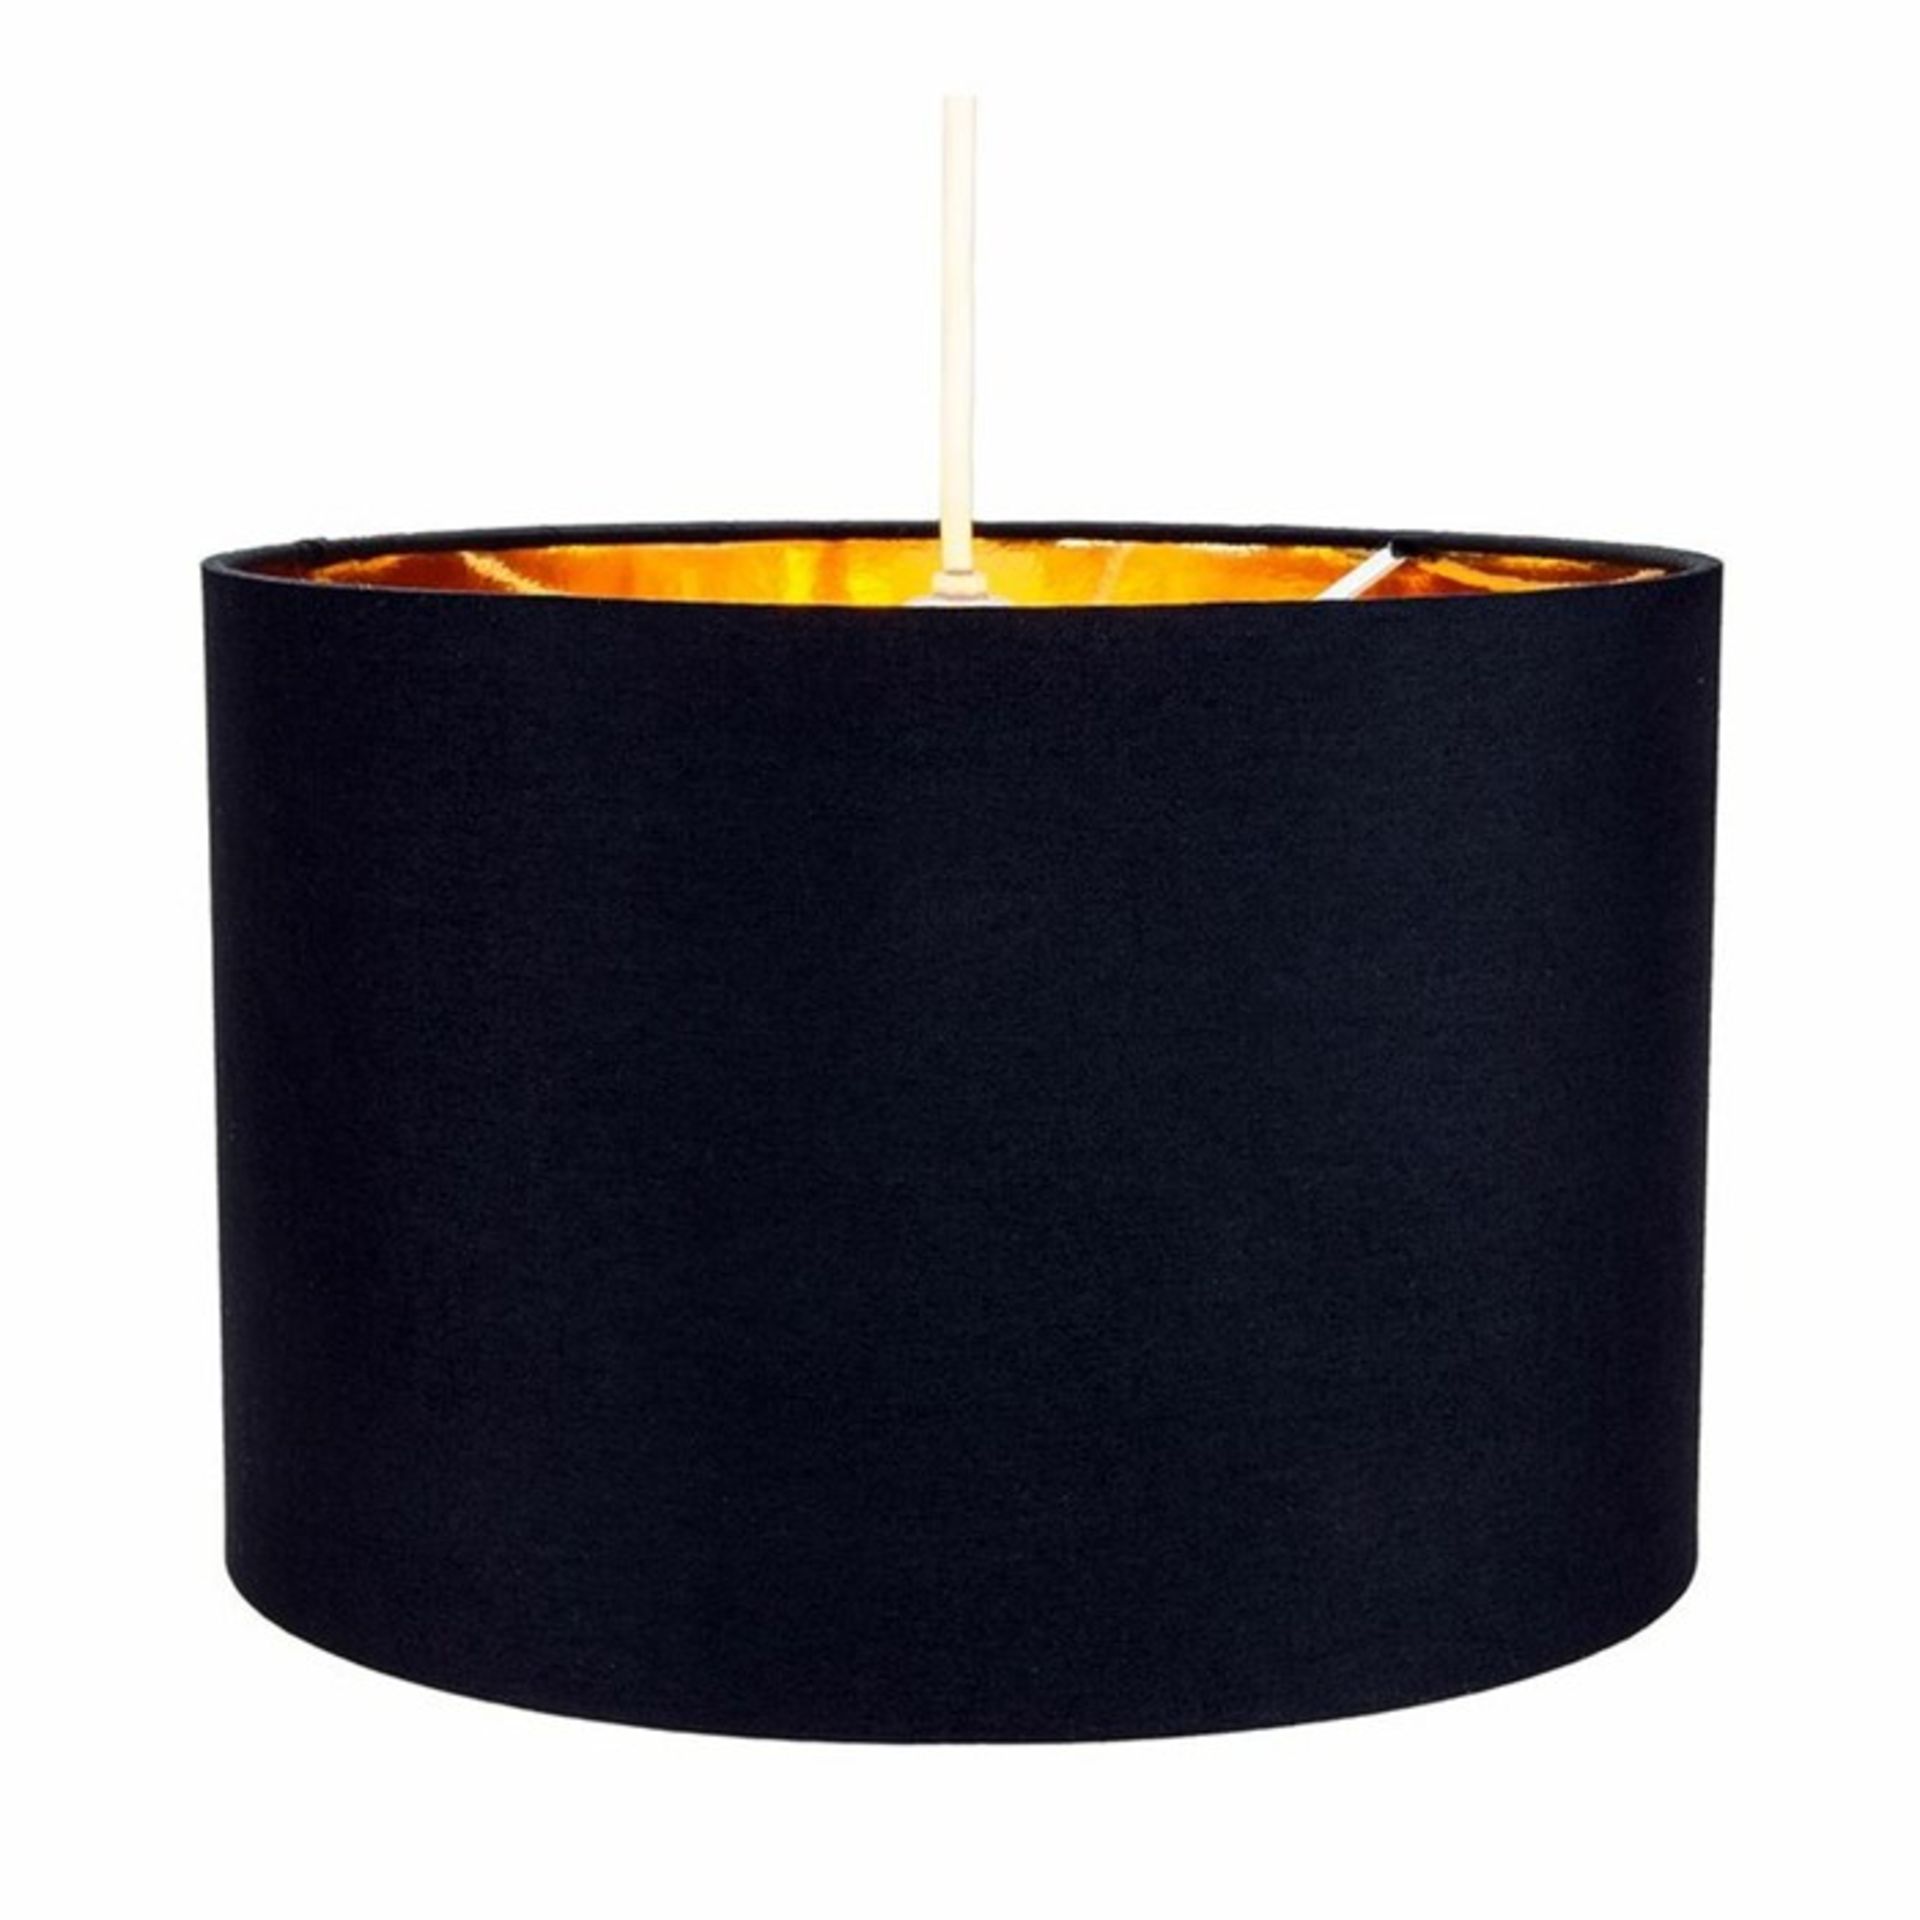 17 Stories,30cm Cotton Drum Lamp Shade RRP - £17.9 - Image 2 of 2